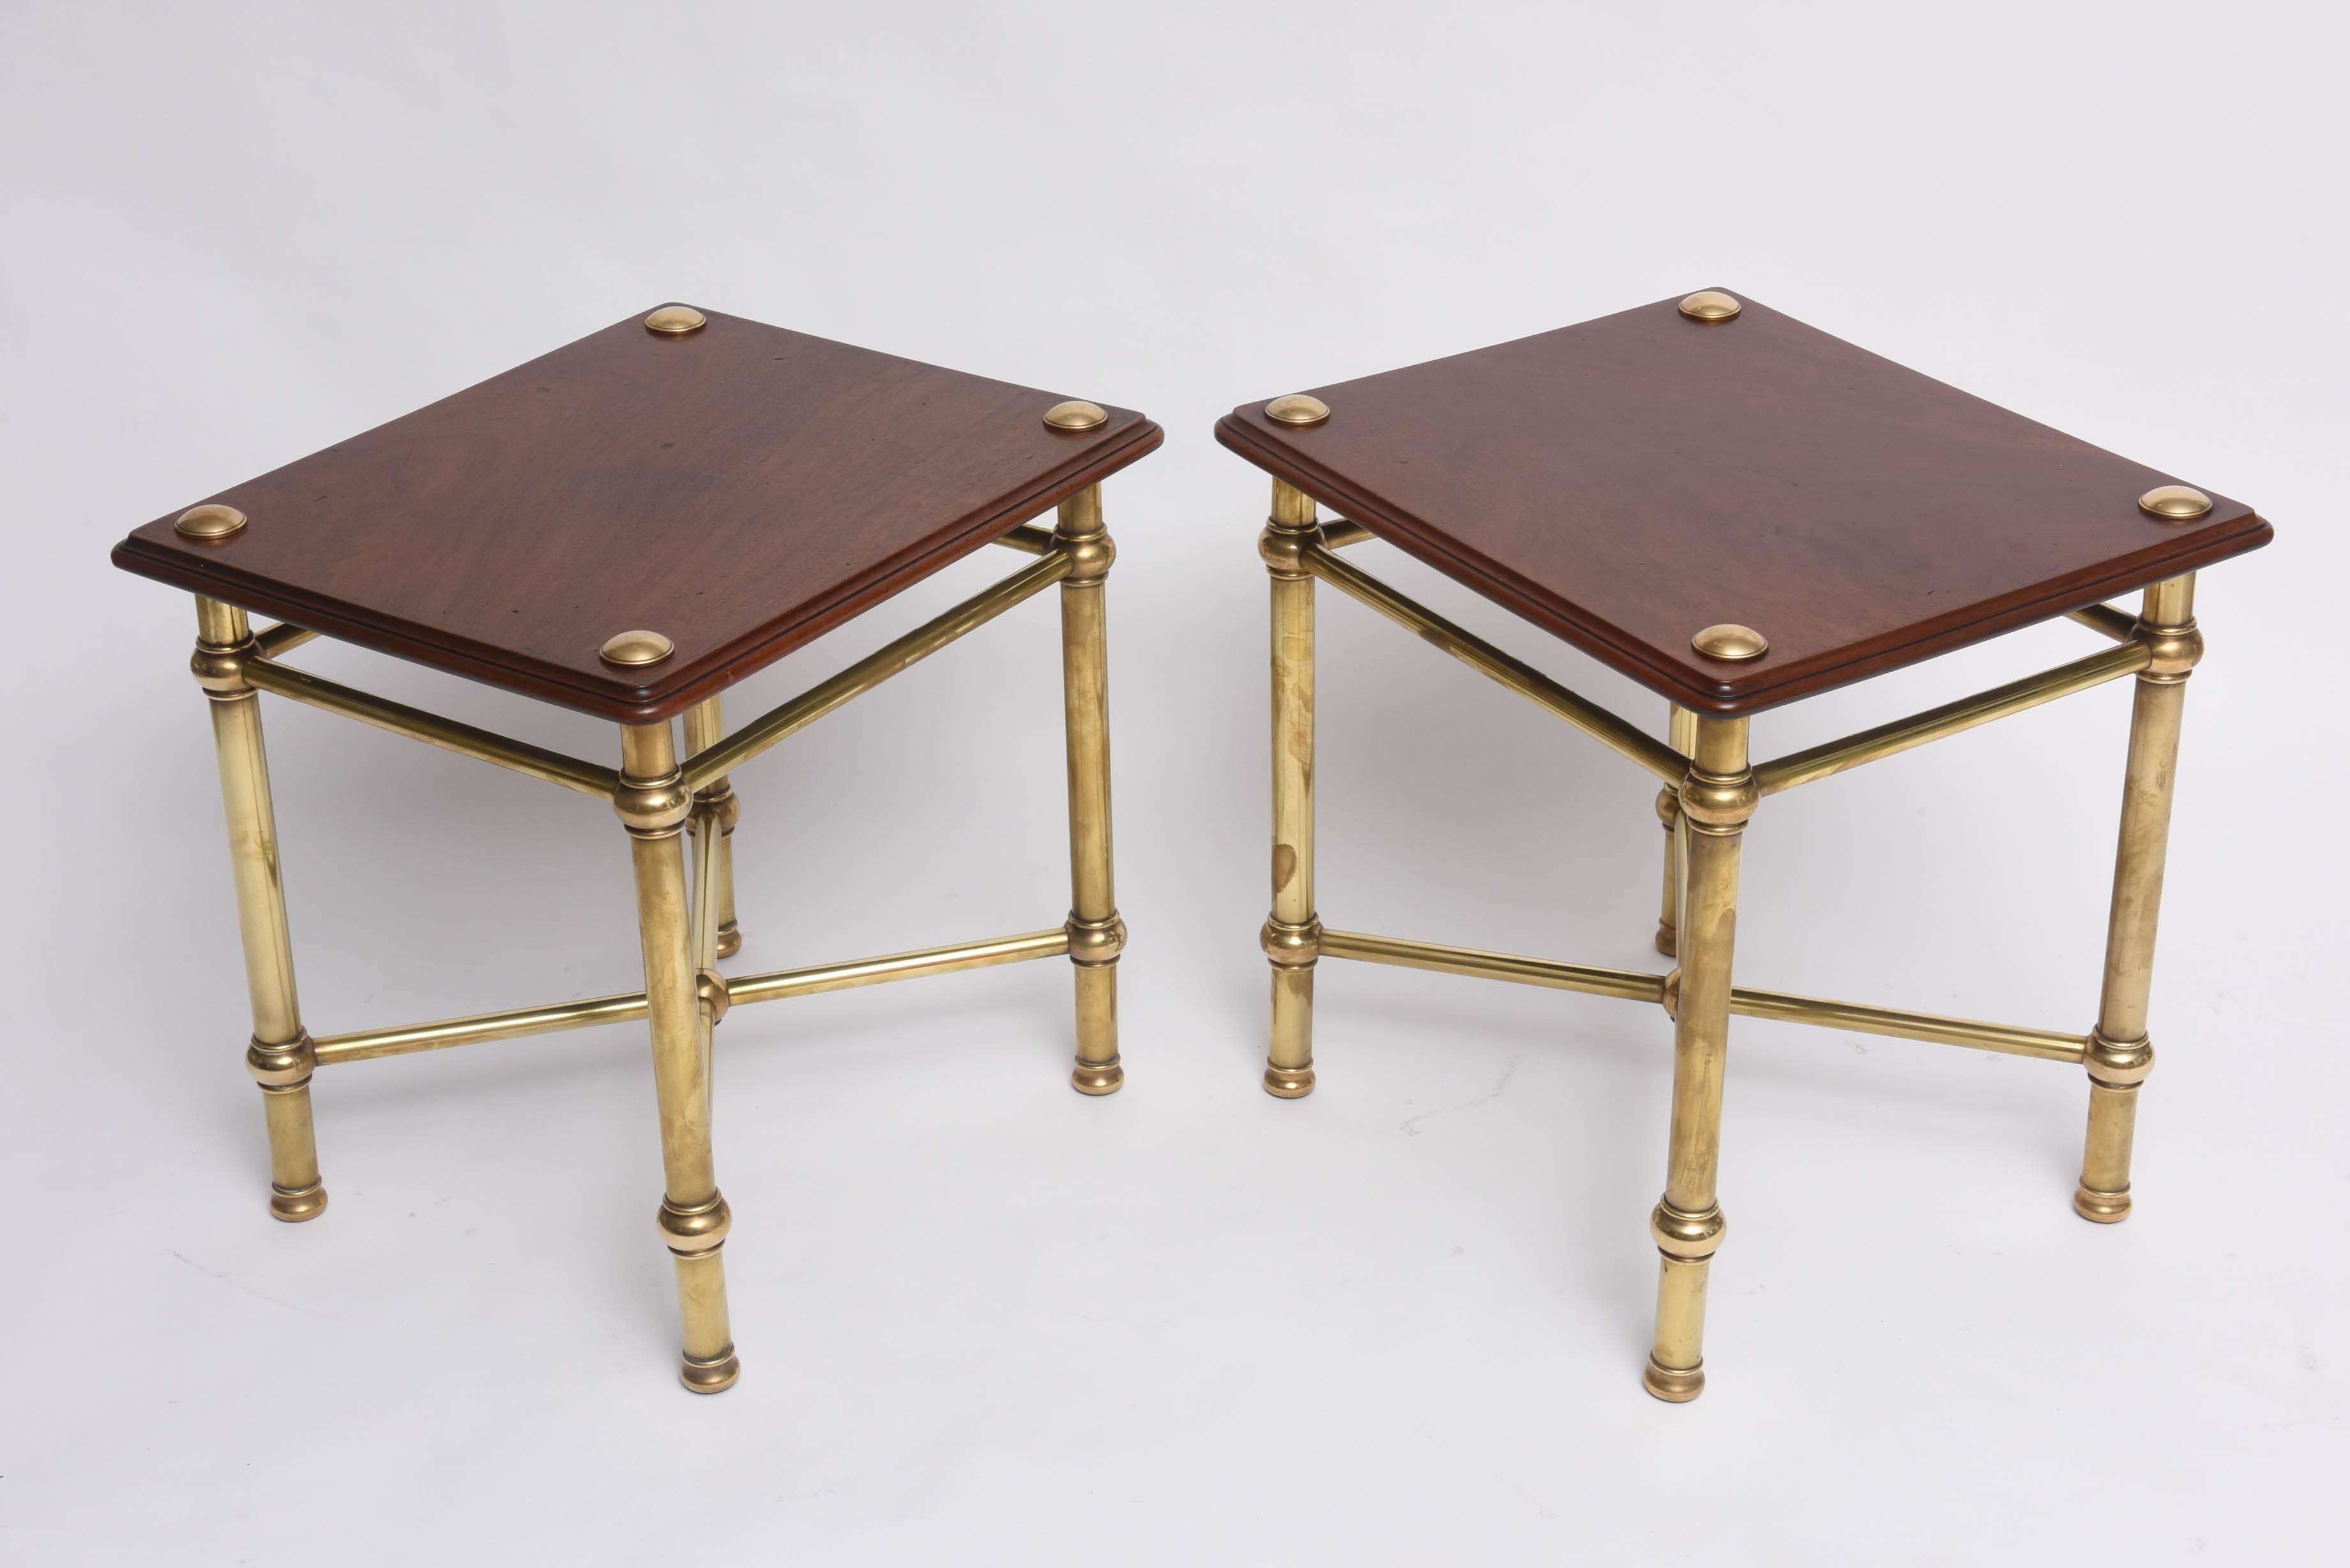 20th Century Pair of Side Tables in Brass and Wood, England, 1940s